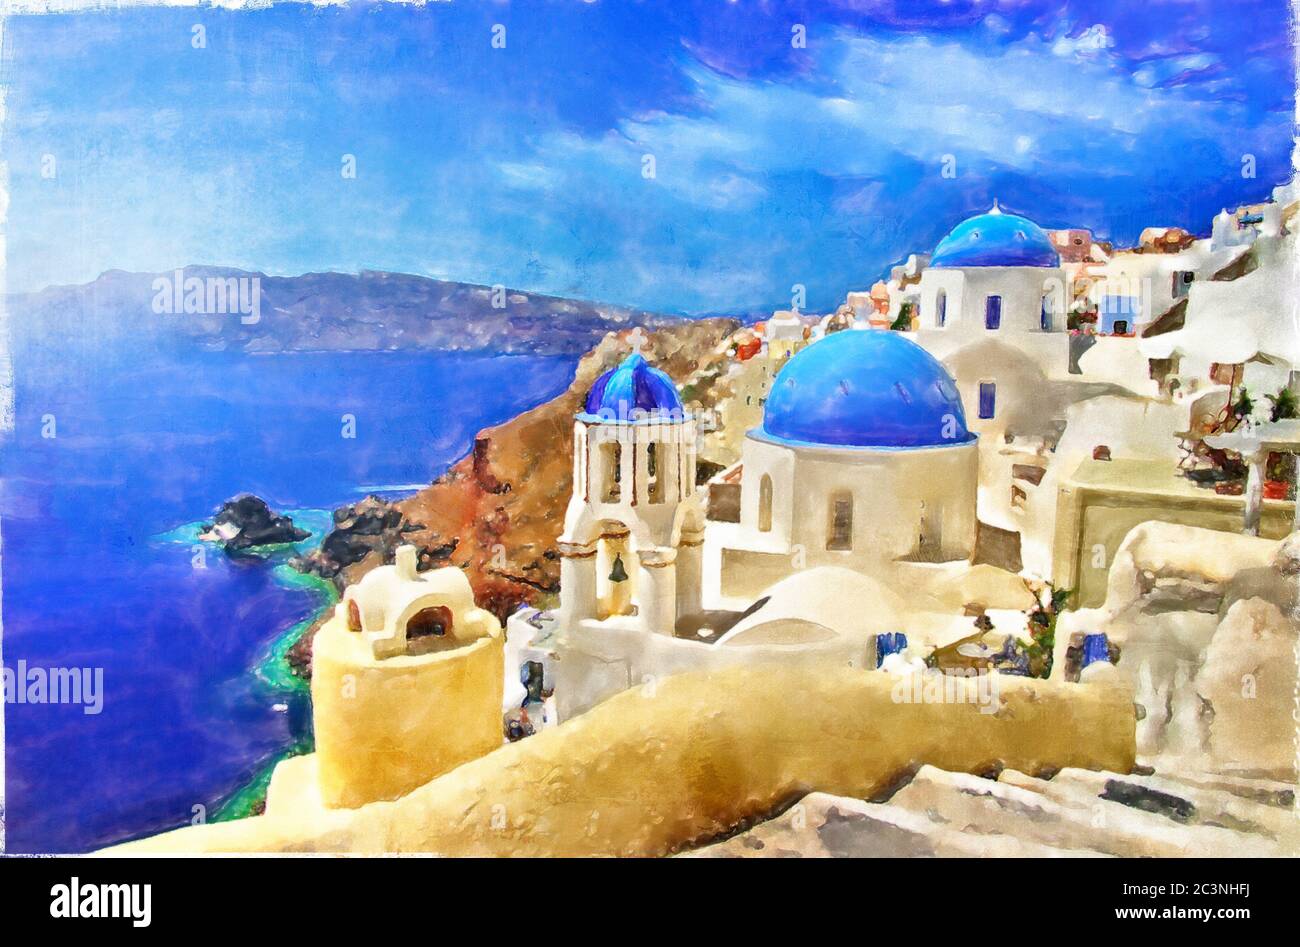 iconic Santorini island. Blue domes of Oia. Greece symbol. Artwork in painting style Stock Photo